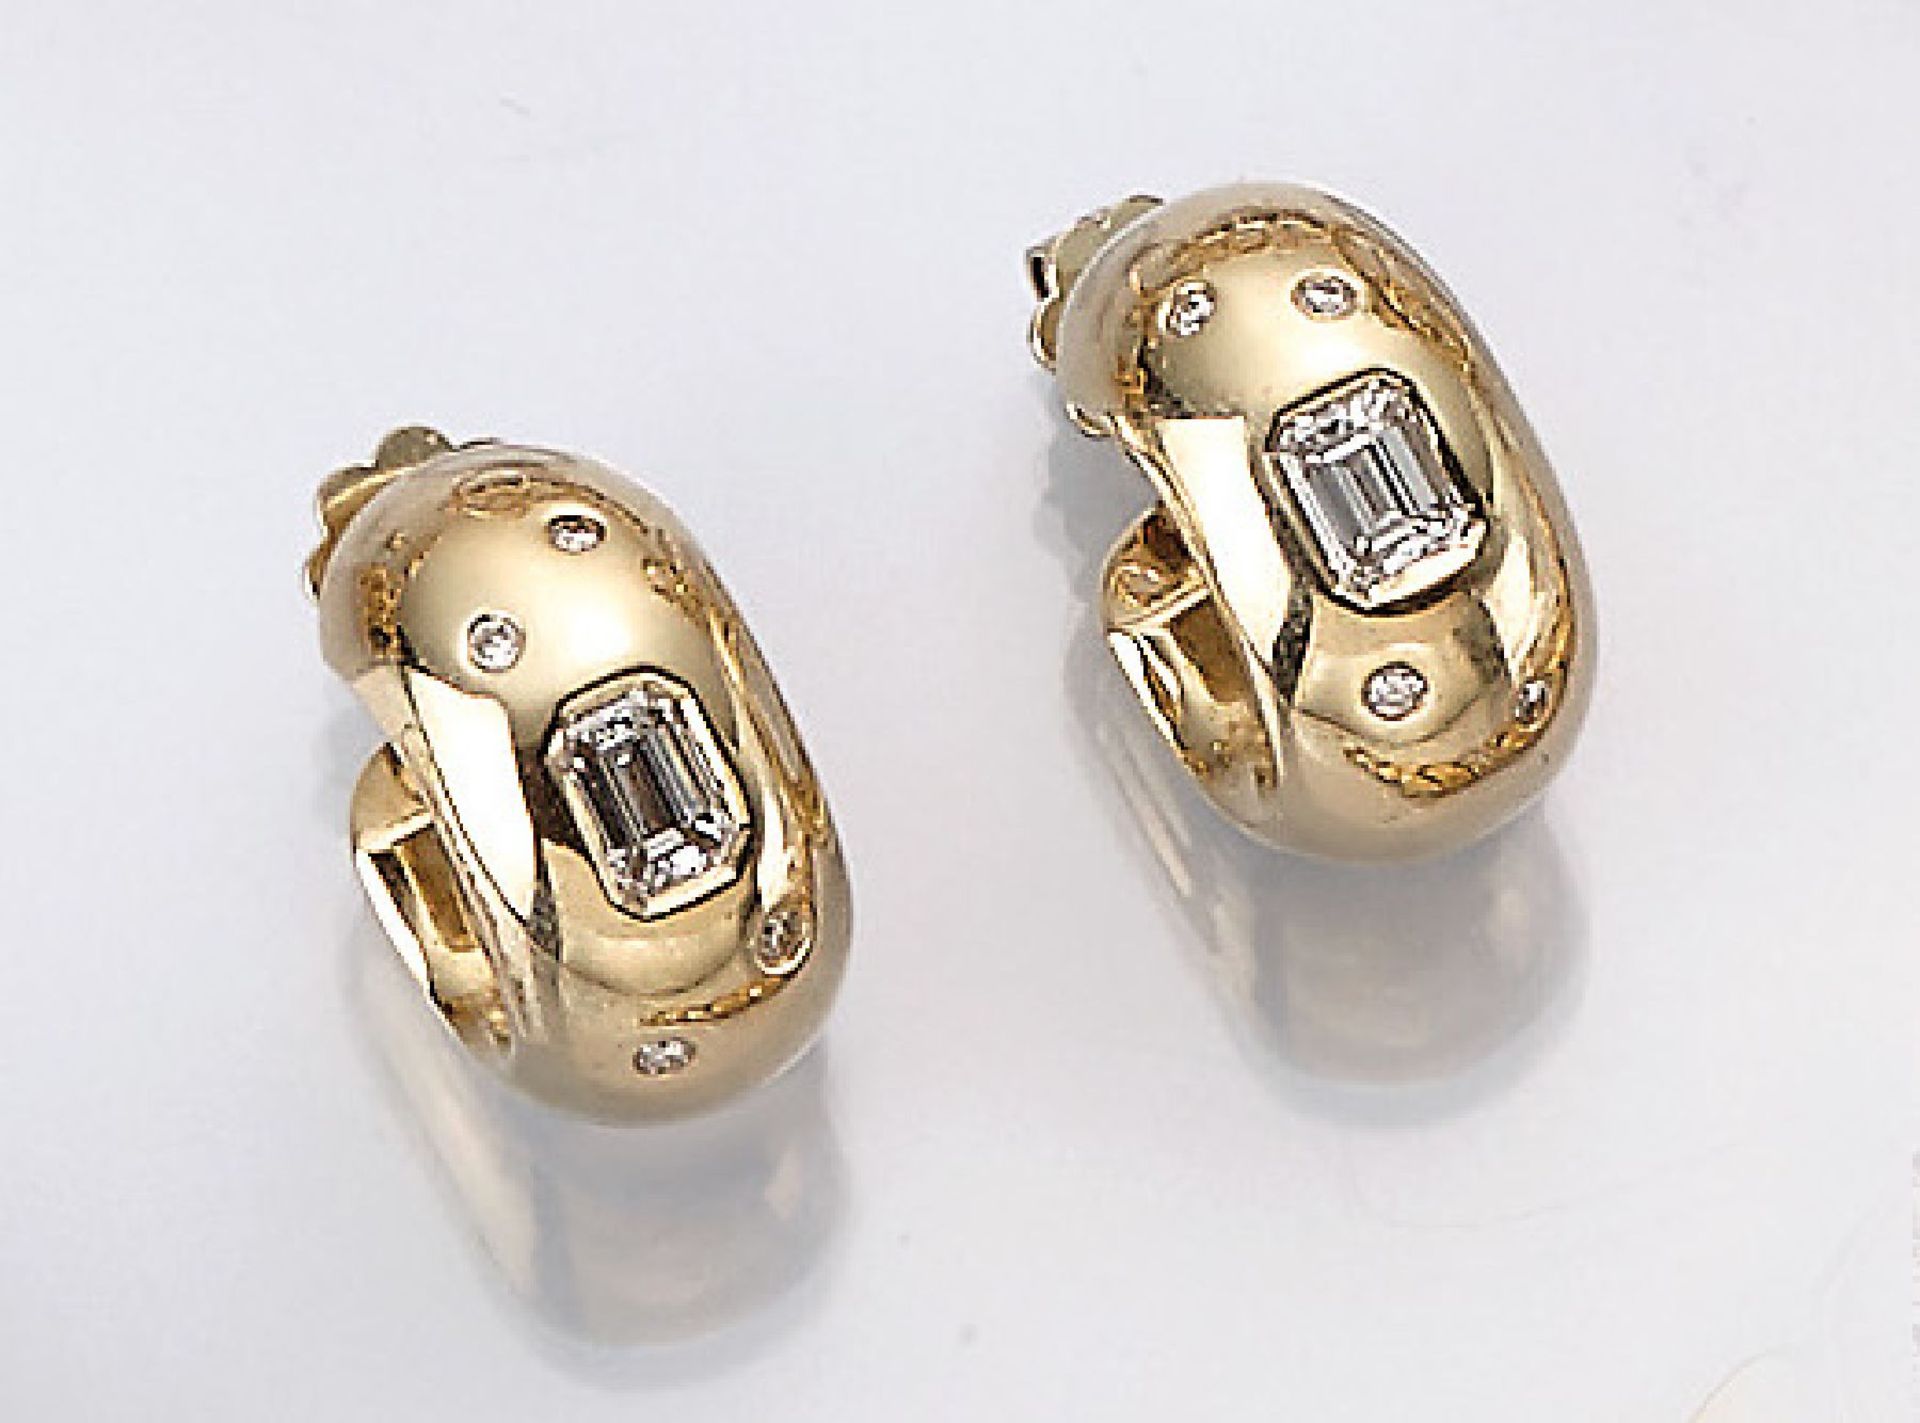 Pair of 14 kt gold hoop earrings with diamonds , YG 585/000, 2 diamond-baguettes total approx. 0.